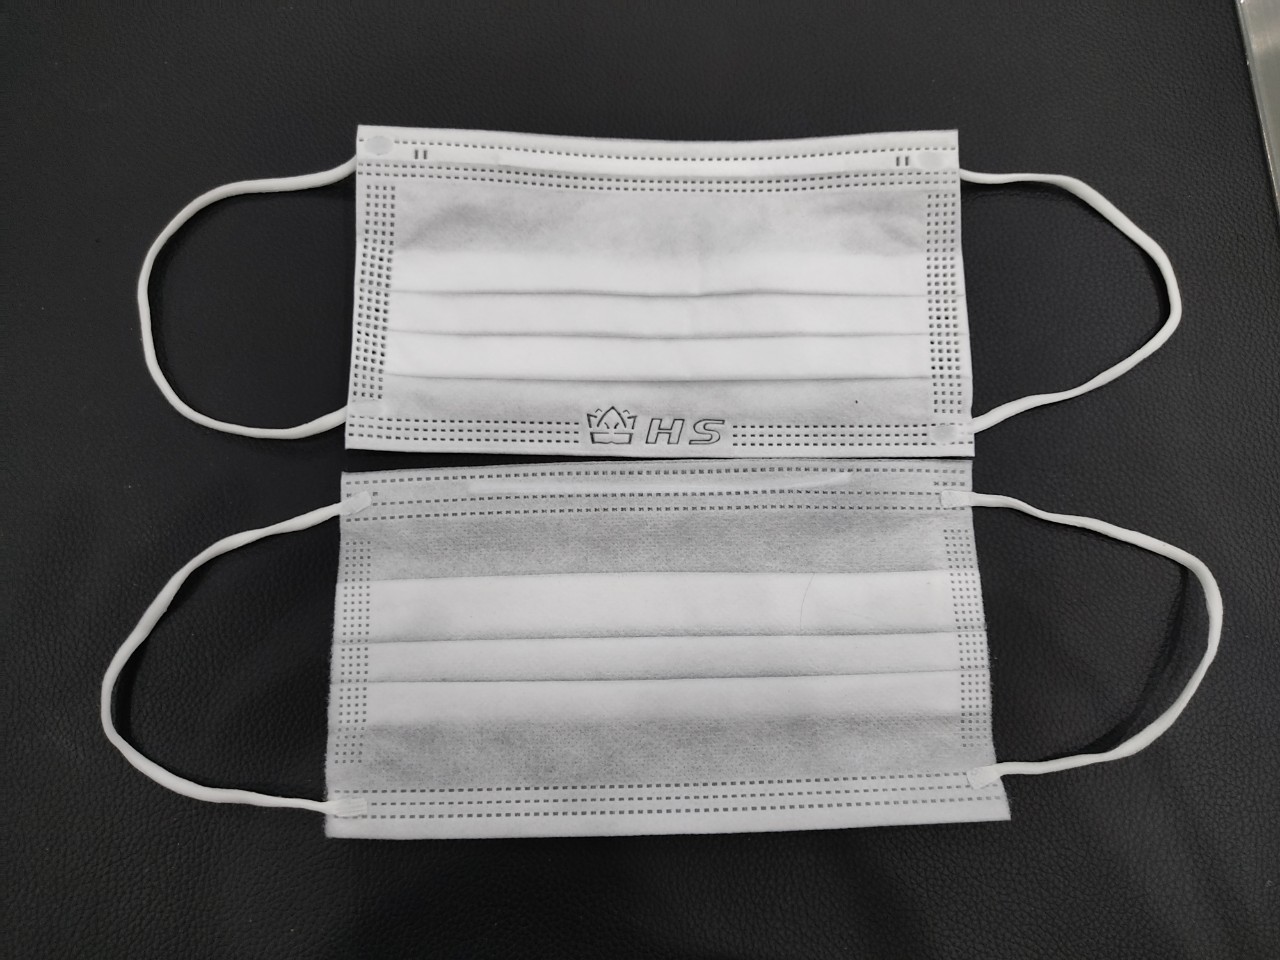 surgical facemask